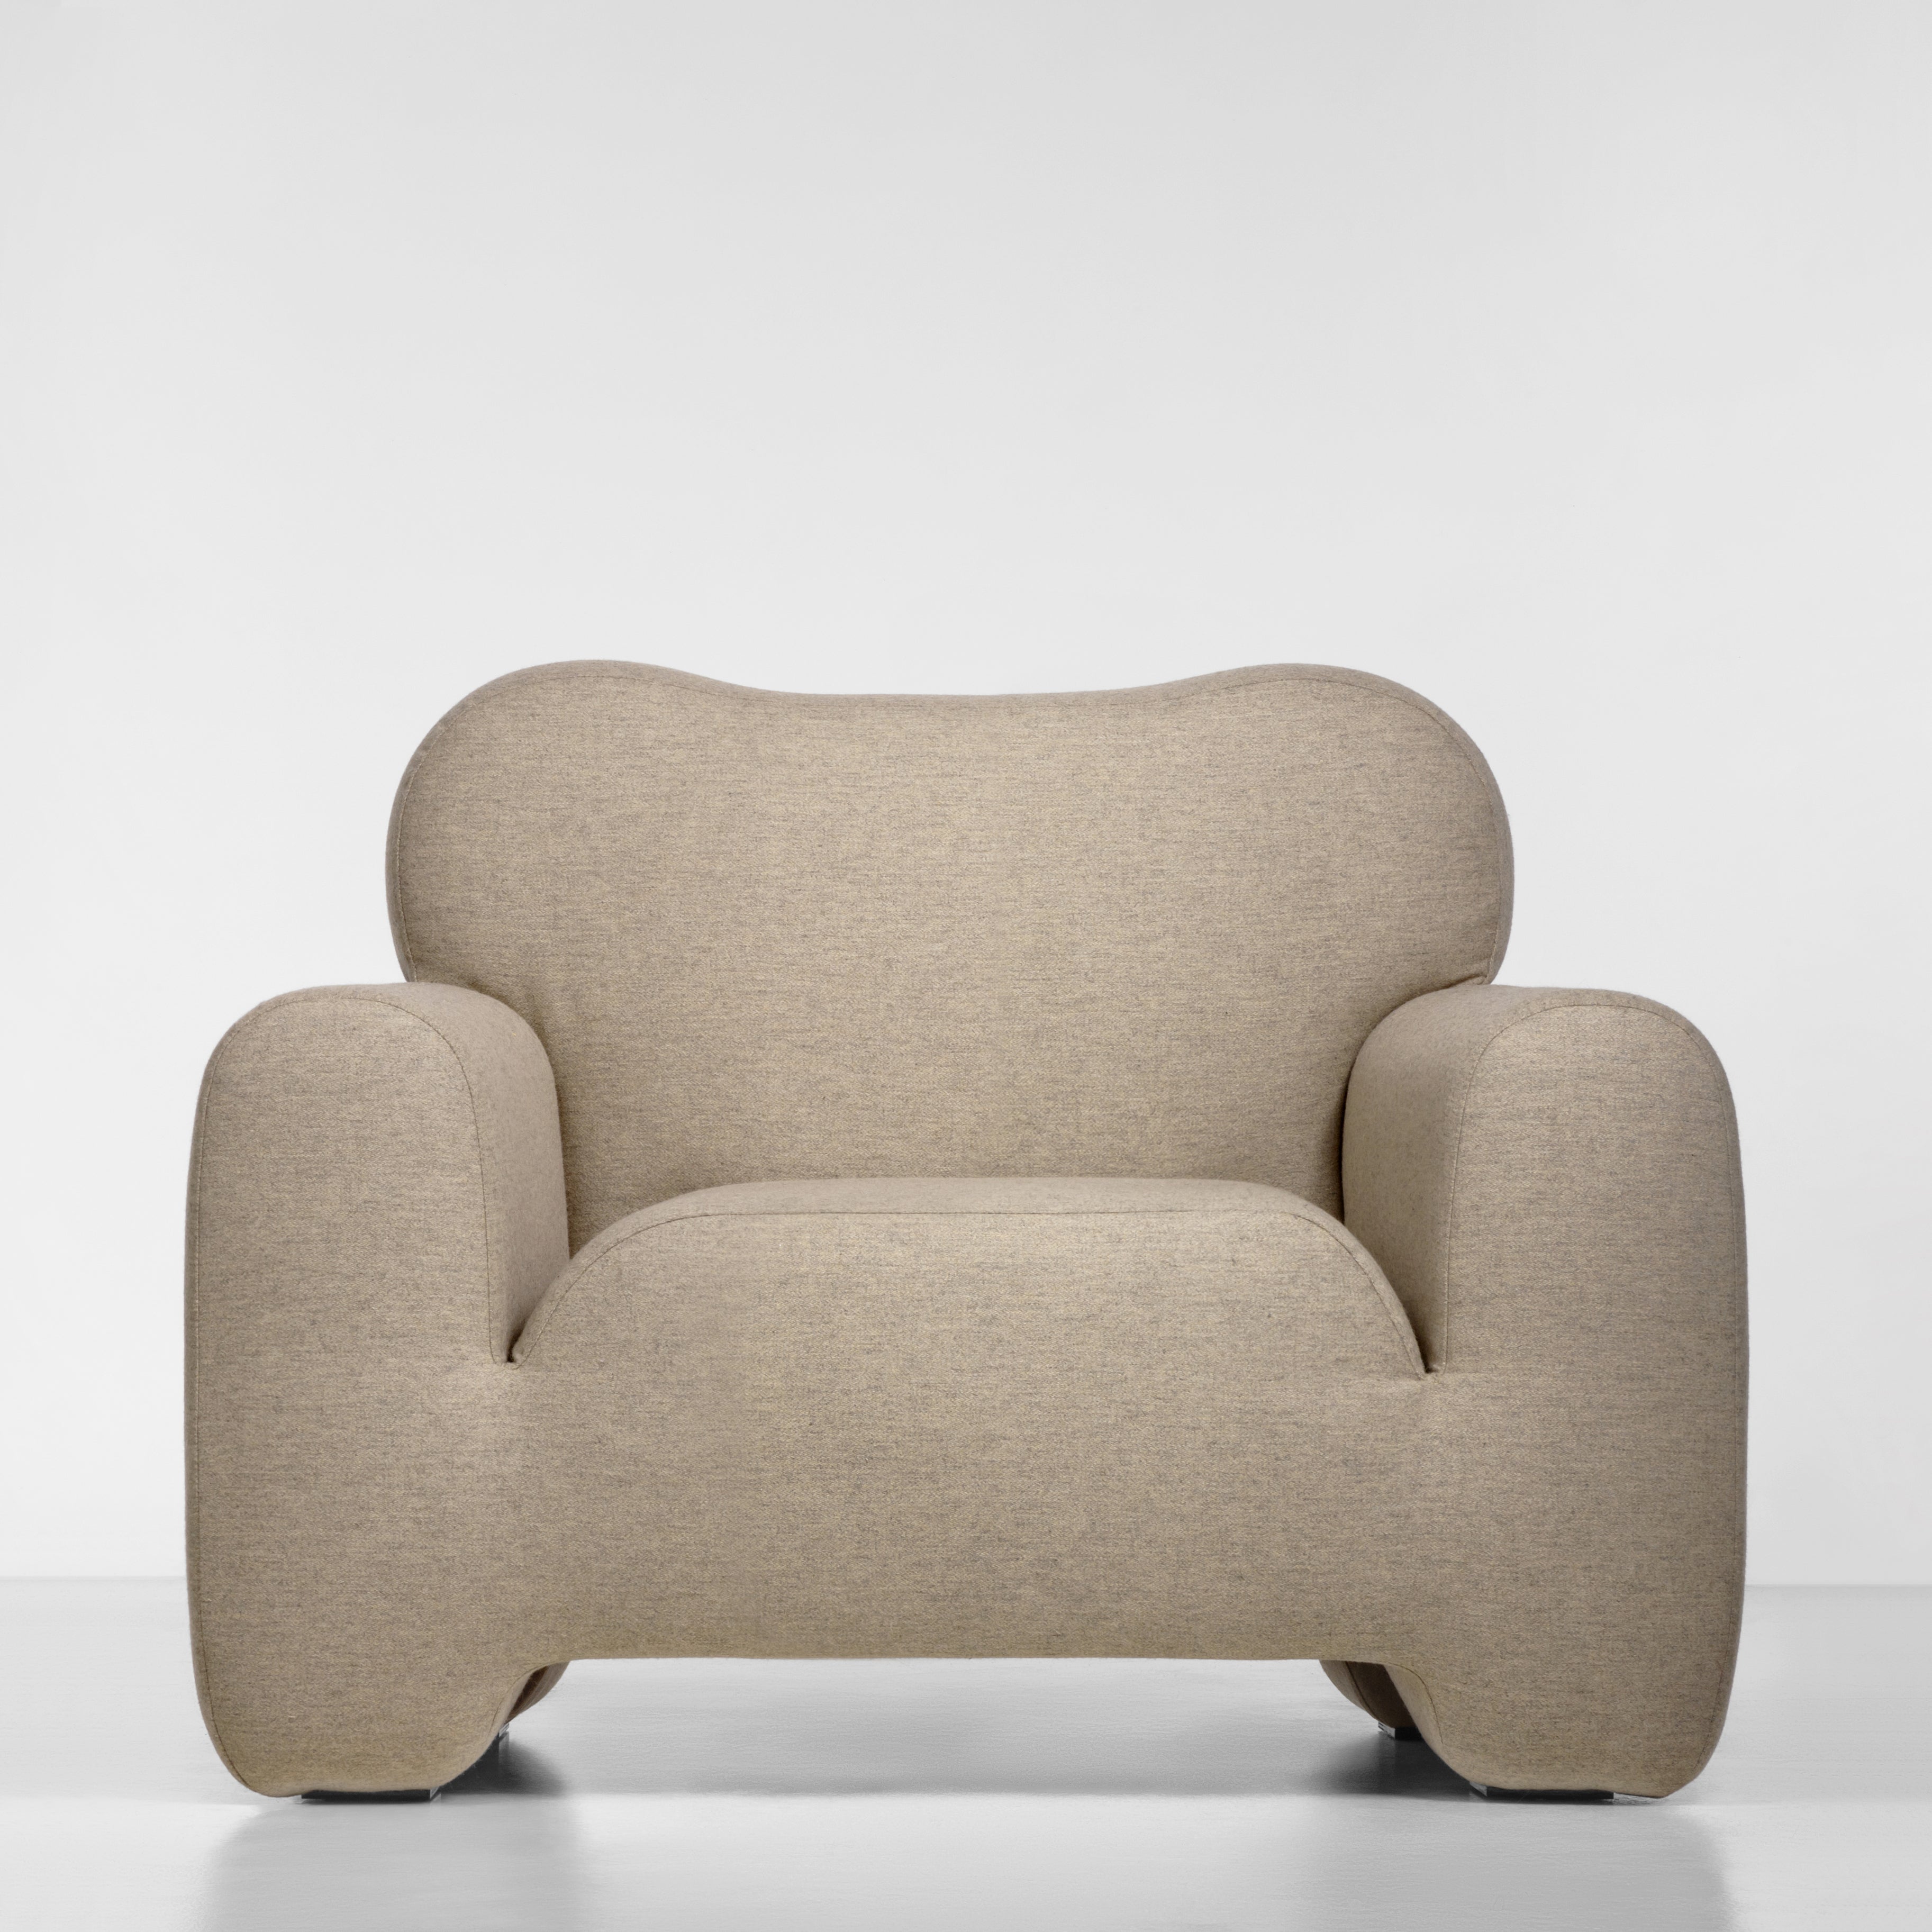 products/Pampukh_armchair.jpg